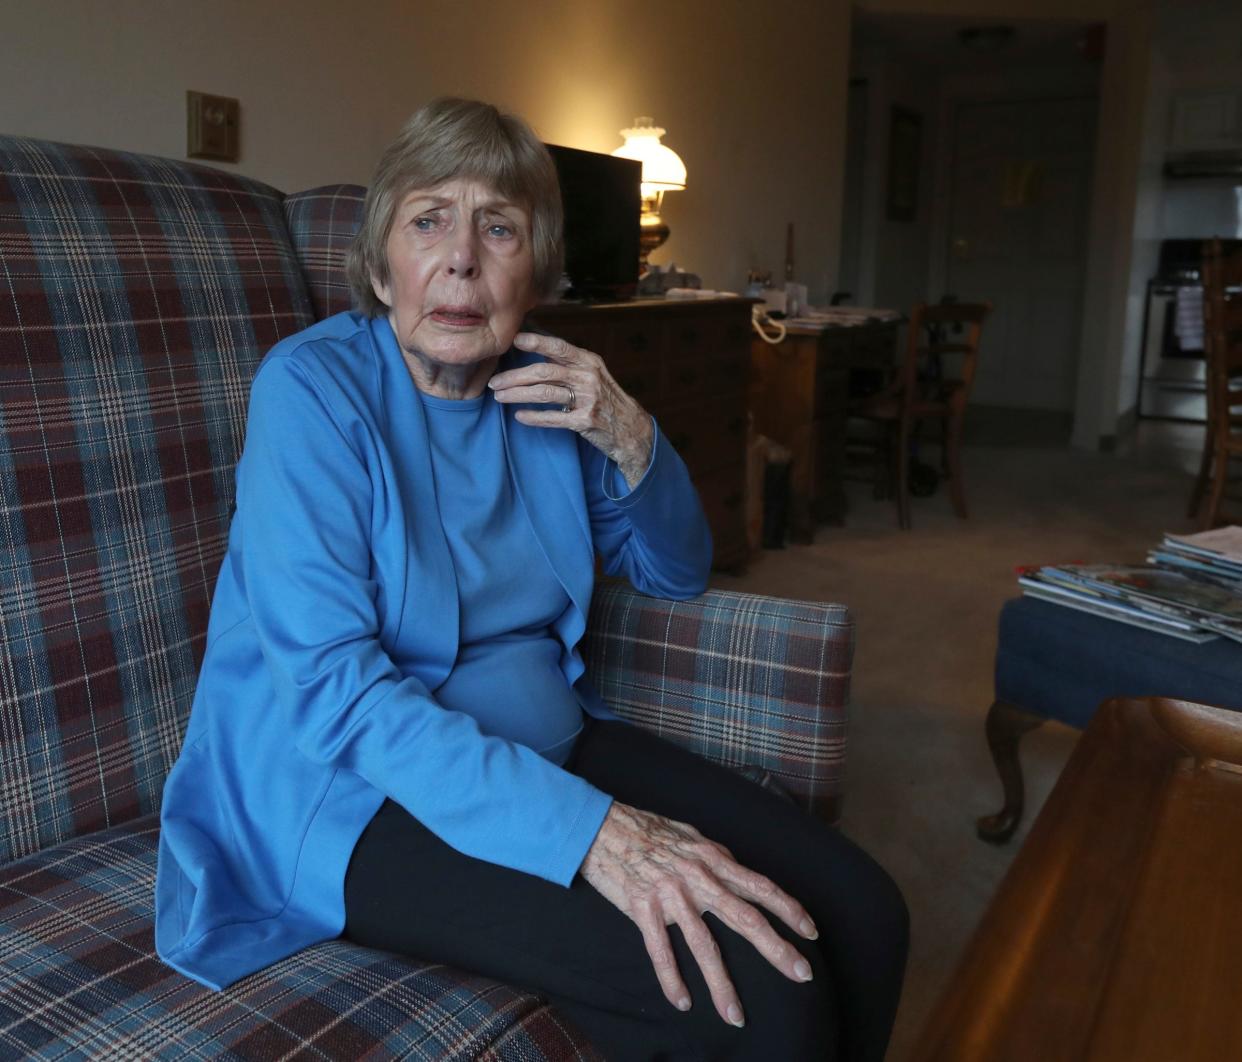 Former Birmingham mayor Dorothy Conrad 88, talks about her possible eviction from Baldwin House senior tower apartment on October 17, 2022.  She is paid up but management won't renew her lease because they claim she is a noisy complainer.